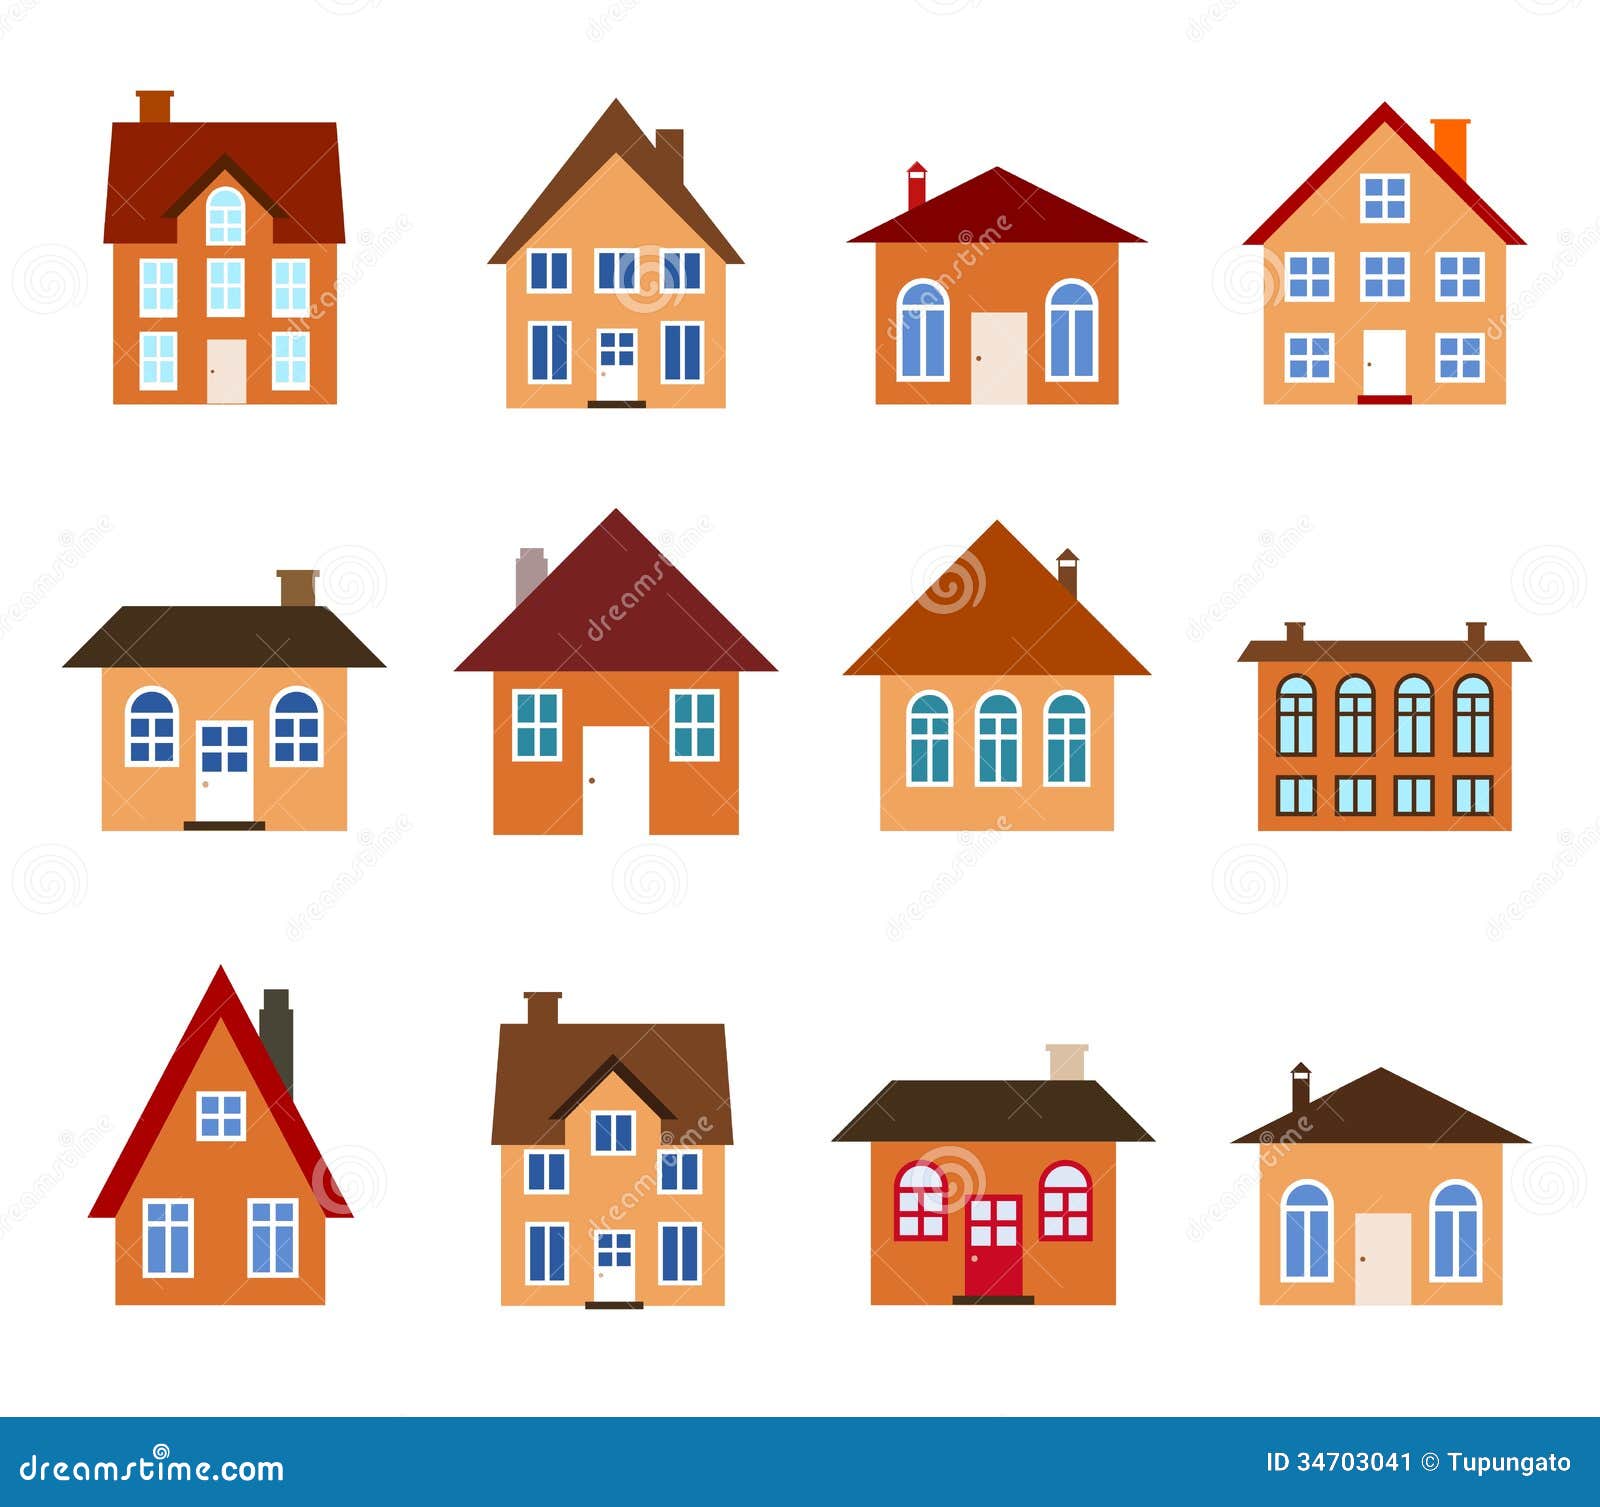 Cartoon homes stock vector. Illustration of houses, graphics - 34703041